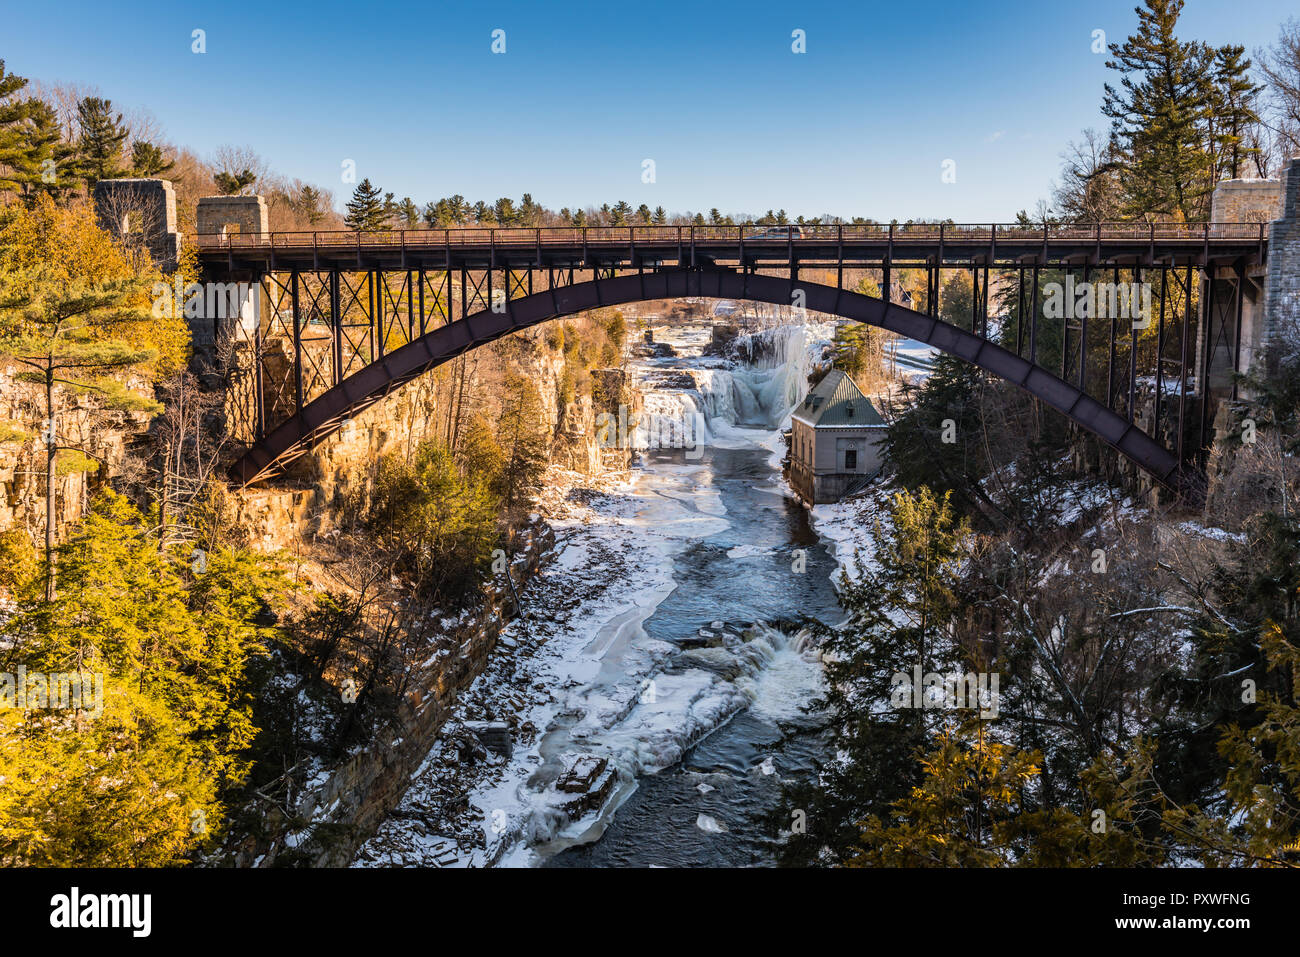 Iron bridge over Ausable River at Ausable Chasm, a 2 mile gorge in the Adirondacks of Upstate New York known as the Grand Canyon of the East. Stock Photo